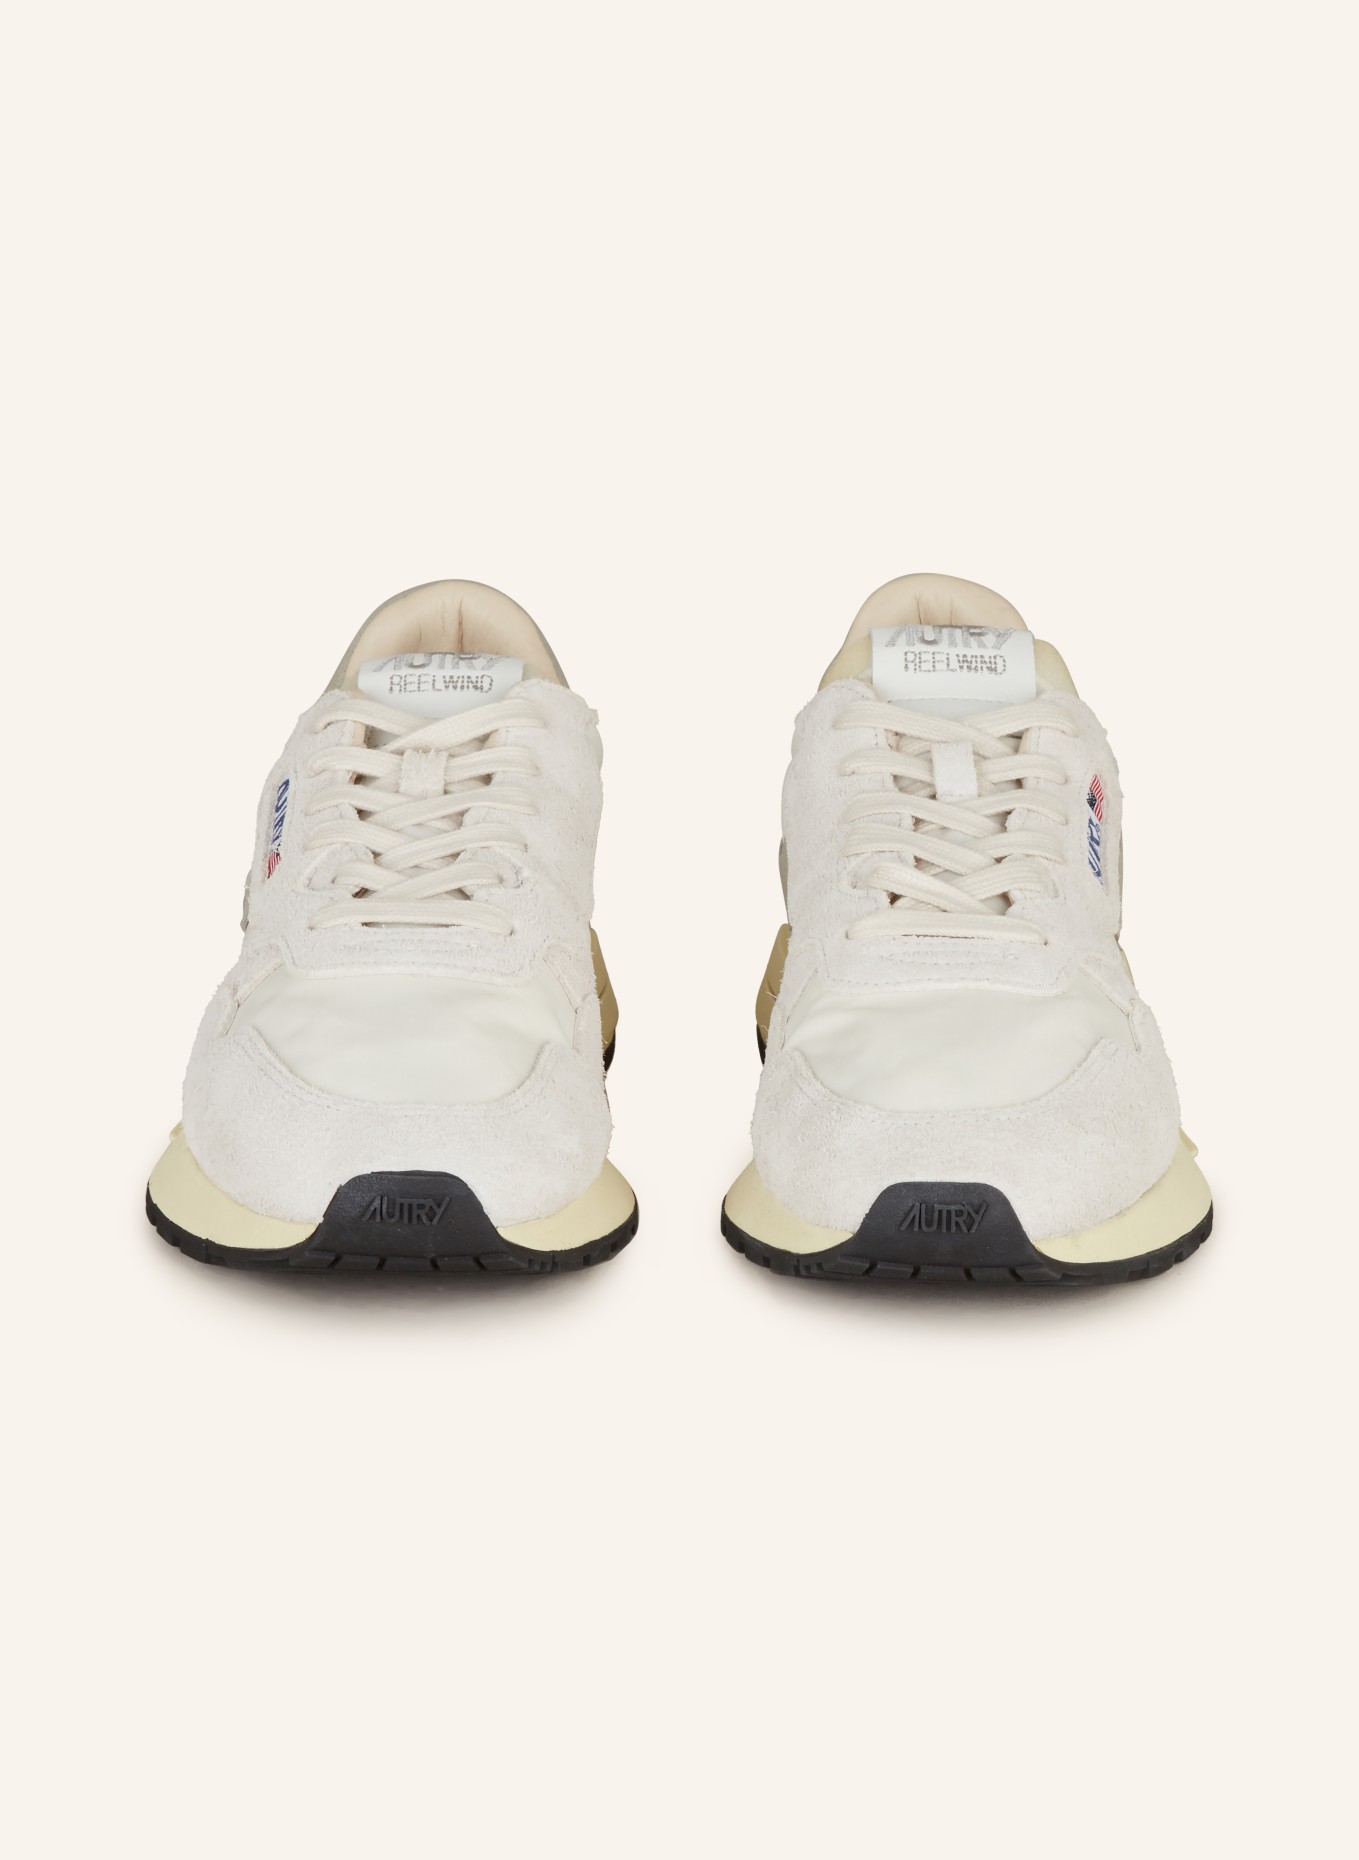 AUTRY Sneakers REELWIND, Color: WHITE/ LIGHT GRAY/ GRAY (Image 3)